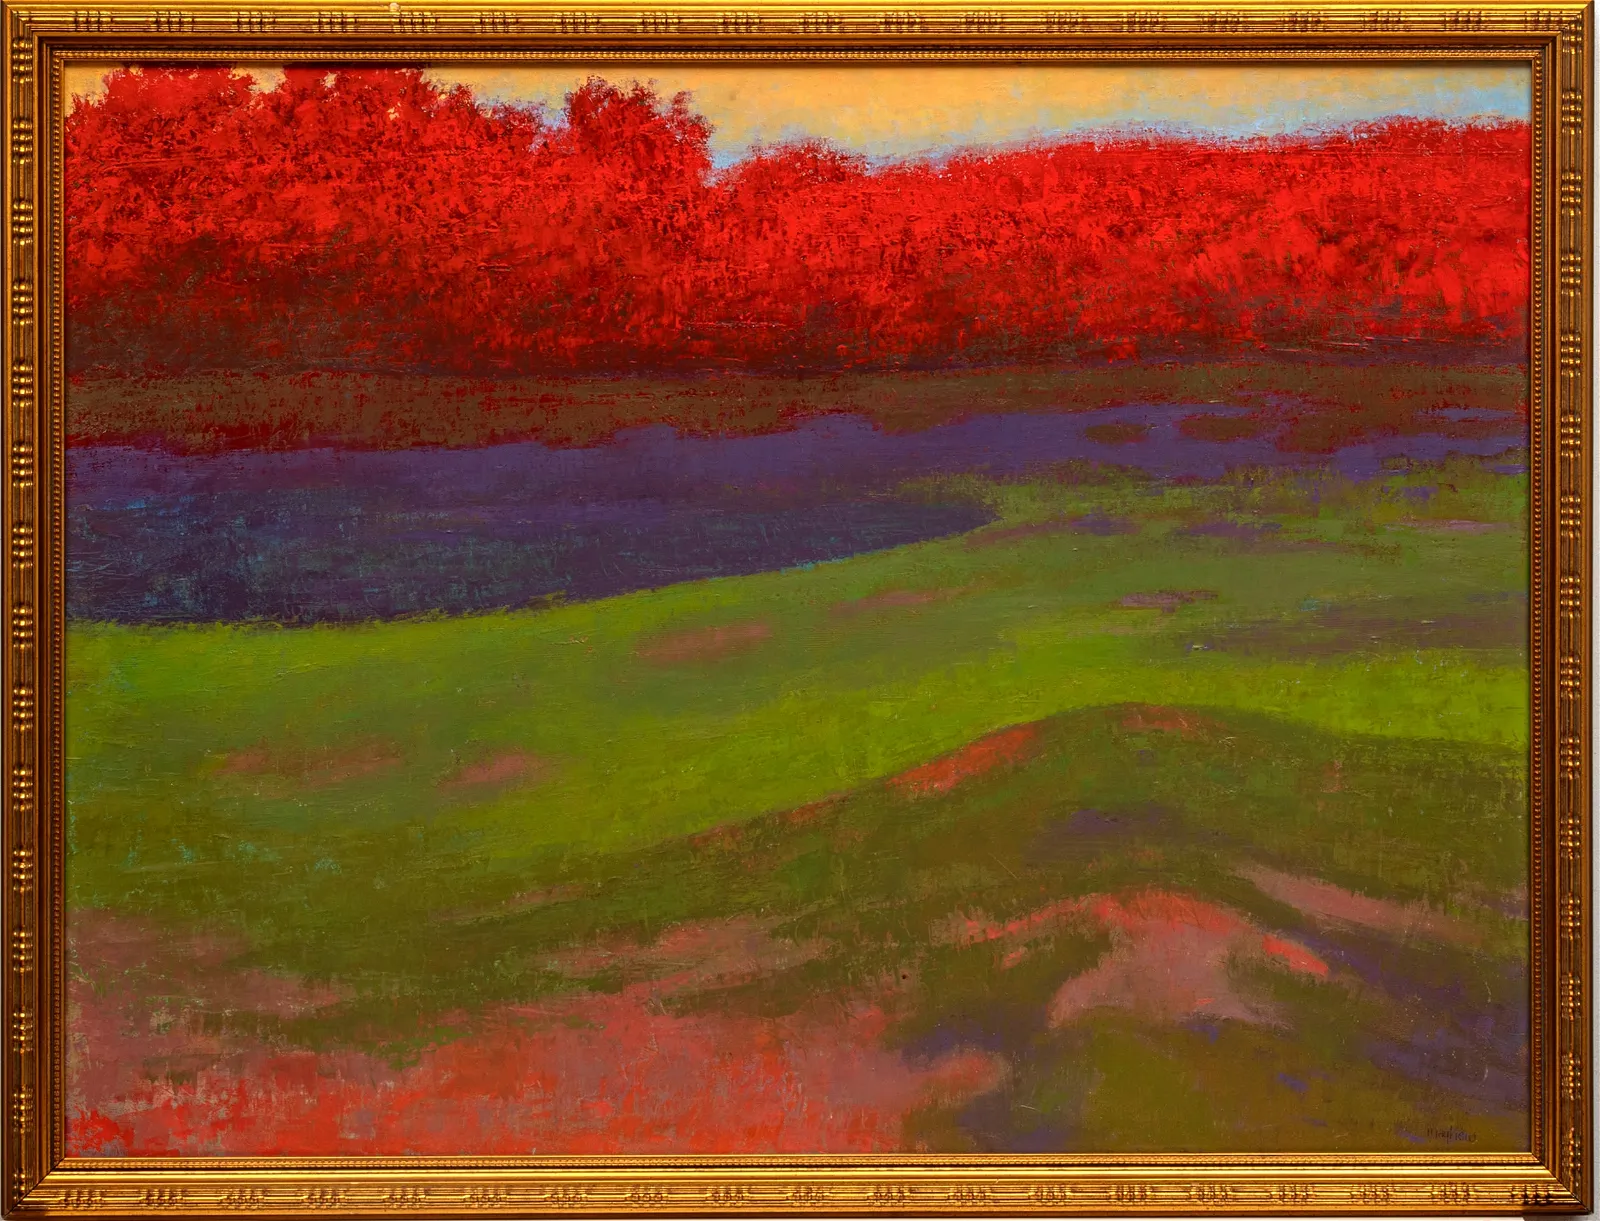 Richard Mayhew, 'Southern Border,' sold for $230,000 ($296,700 with buyer's premium) at DuMouchelles.